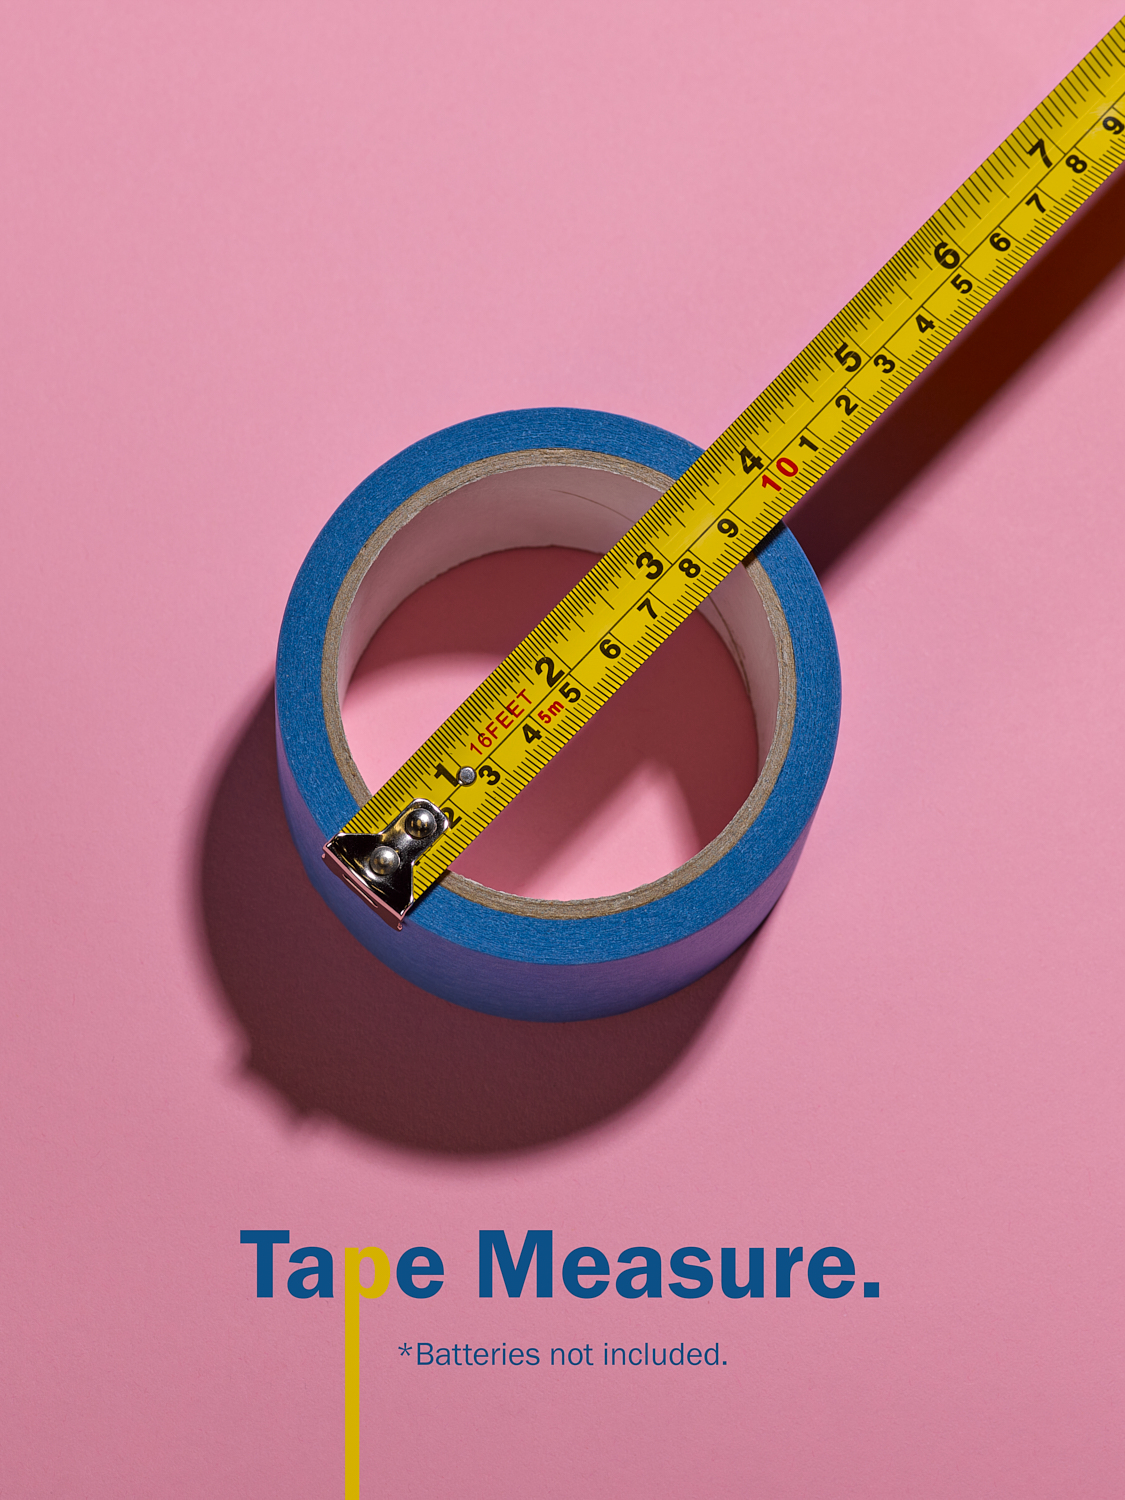 A photograph by Joey Rolph, depicting a role of tape being measured by a tape measure.